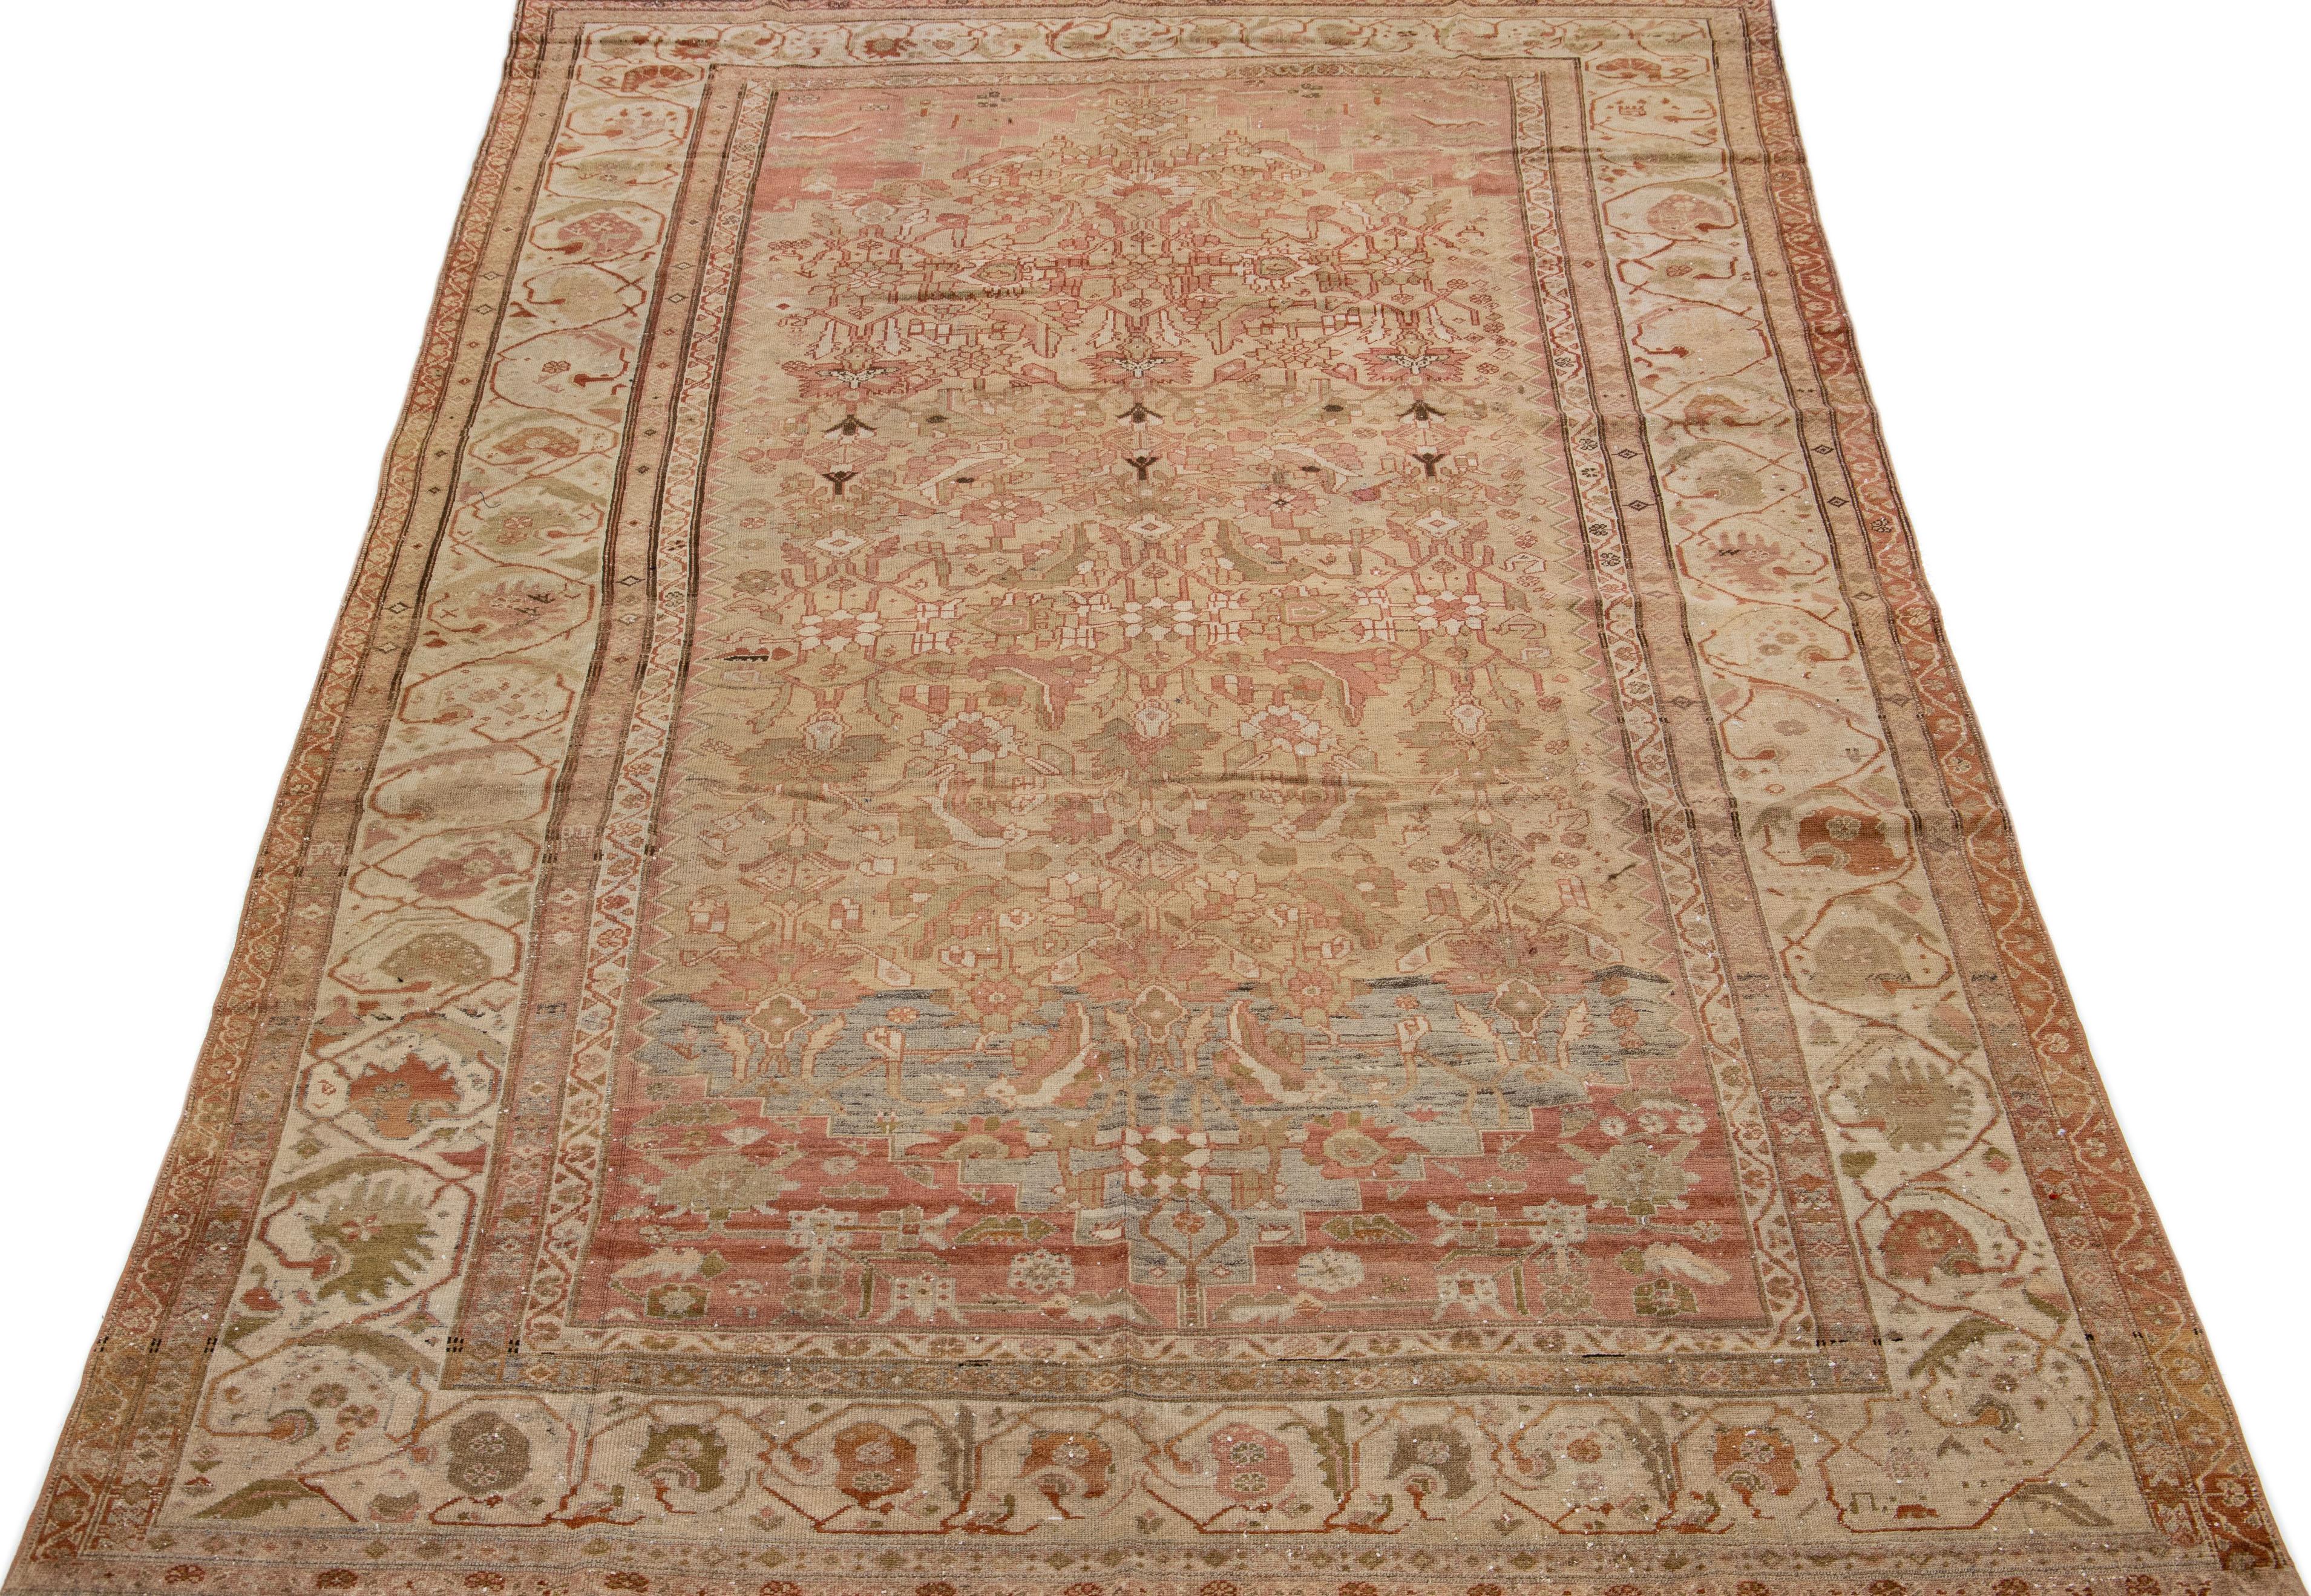 Beautiful antique Malayer hand-knotted wool rug with a tan color field. This Persian rug has peach and blue accents in a gorgeous traditional all-over floral design.

This rug measures 7'4